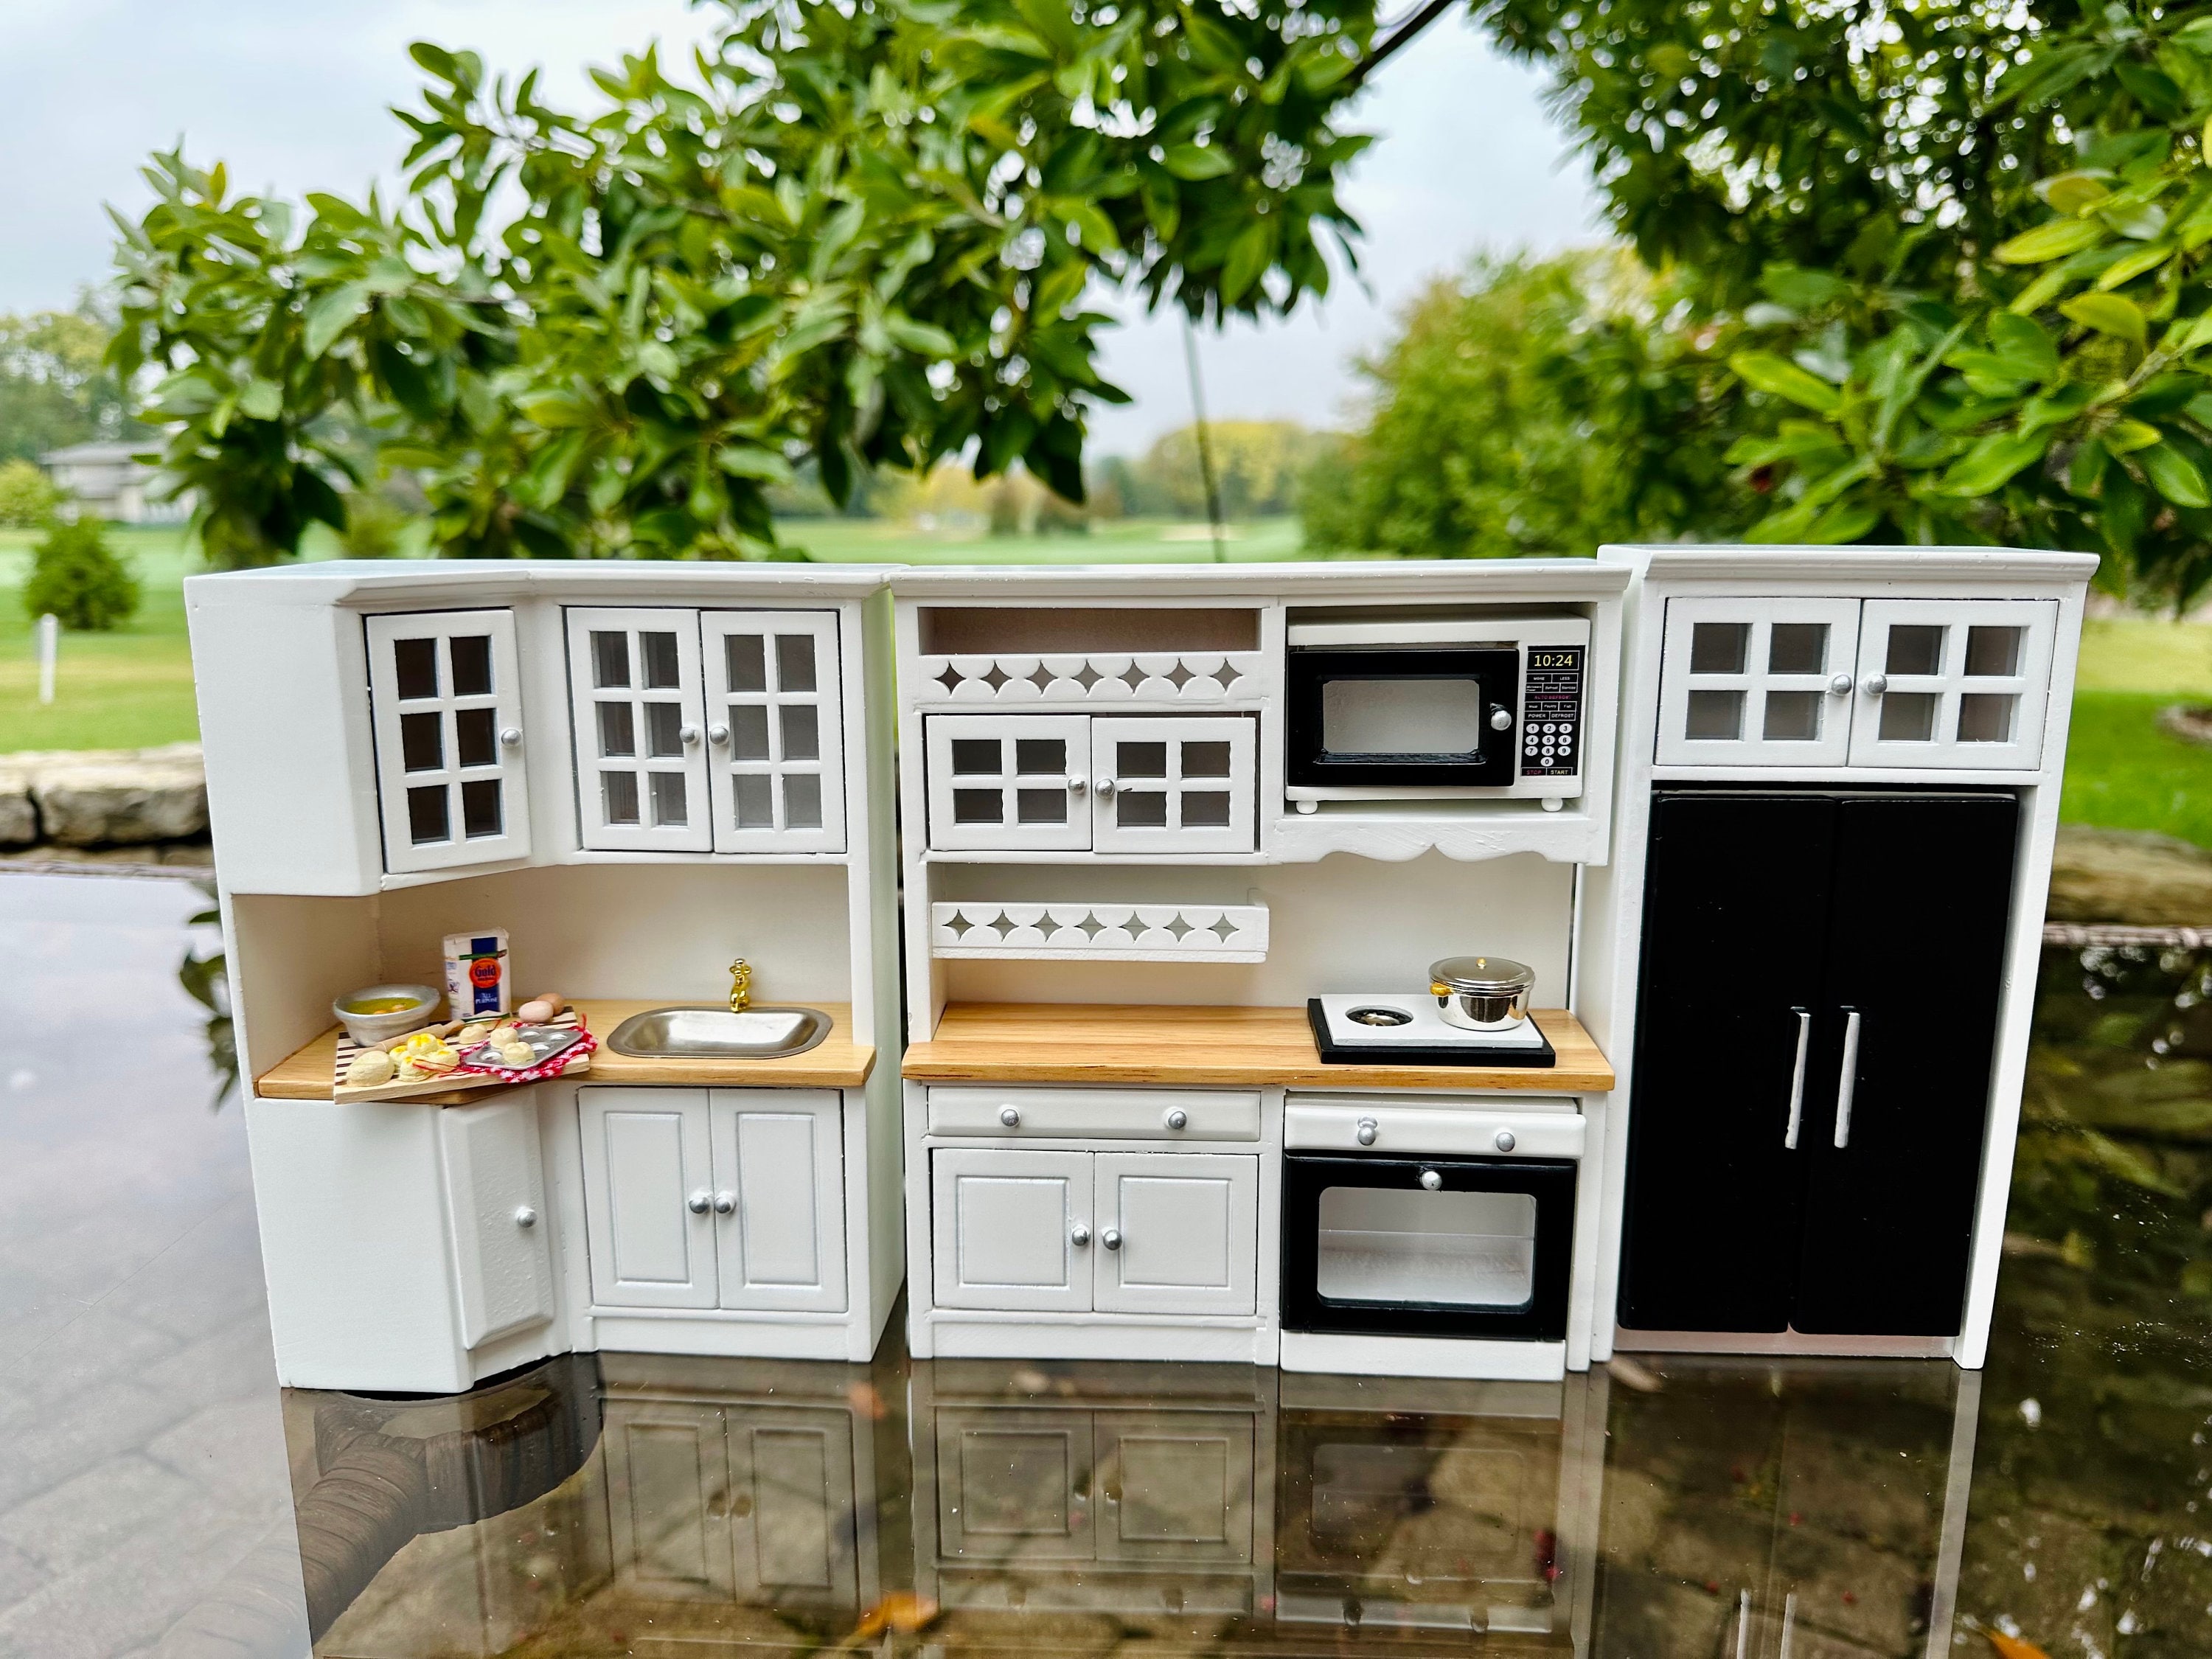 Iland Wooden Dollhouse Furniture Set on 1/12 Scale for Dollhouse Kitchen Incl Modern Miniature Kitchen Cabinets, Fridge, Oven, Microwave, Pots Set, CA